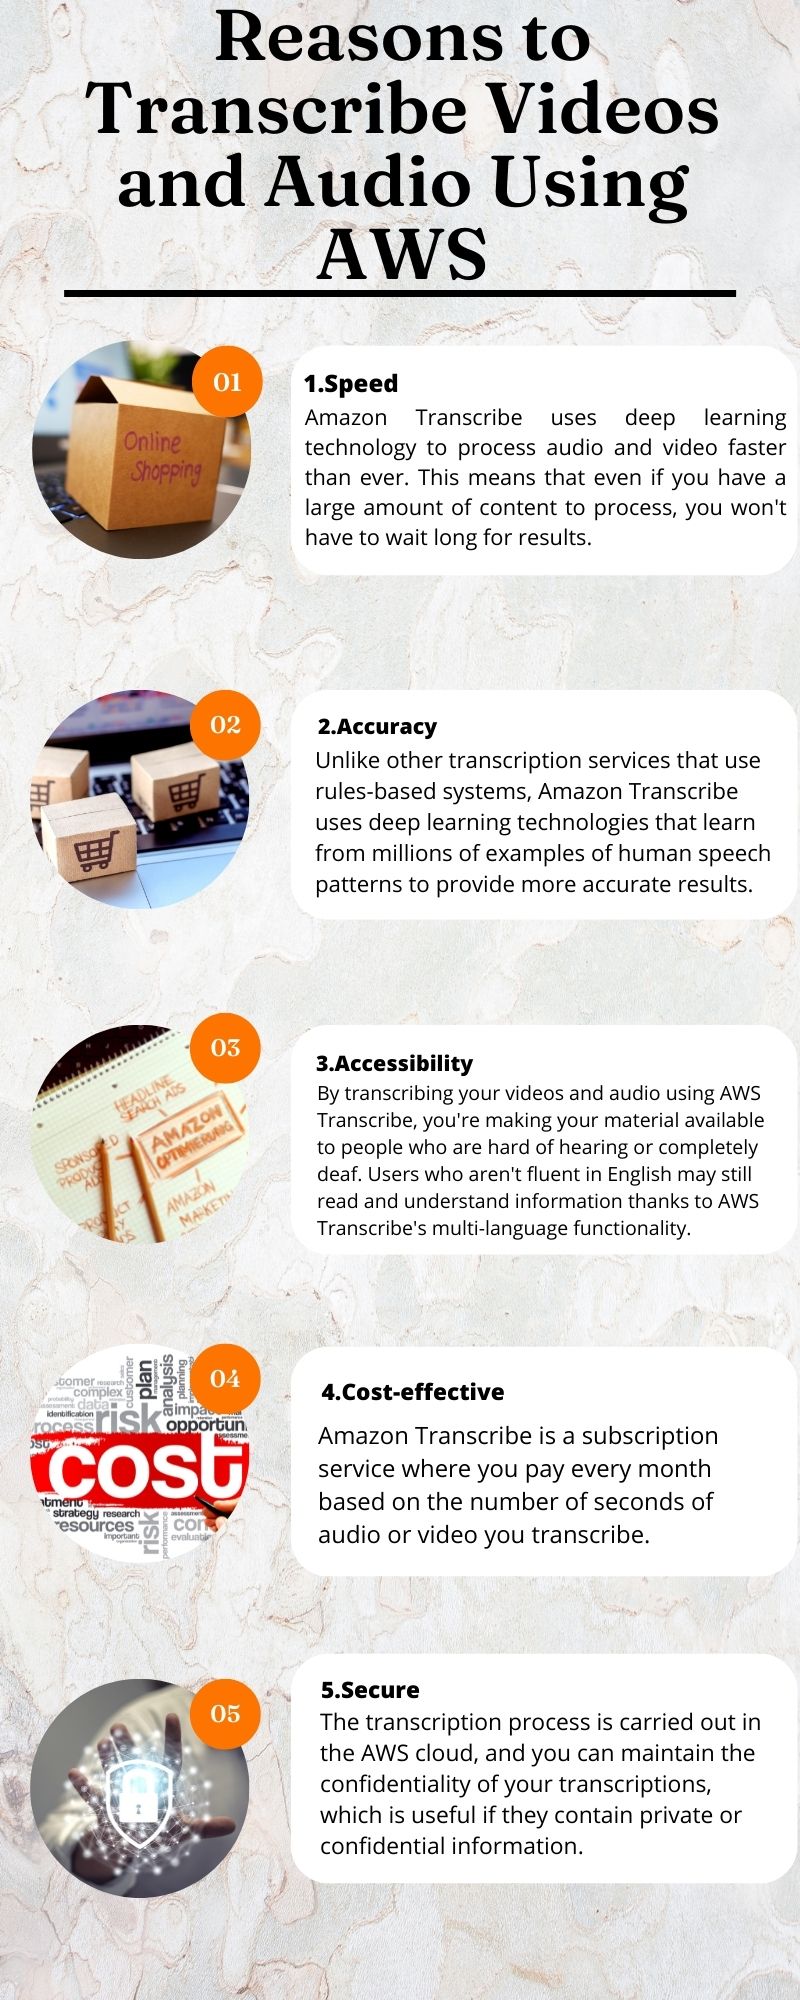 Reasons to Transcribe Videos and Audio Using AWS